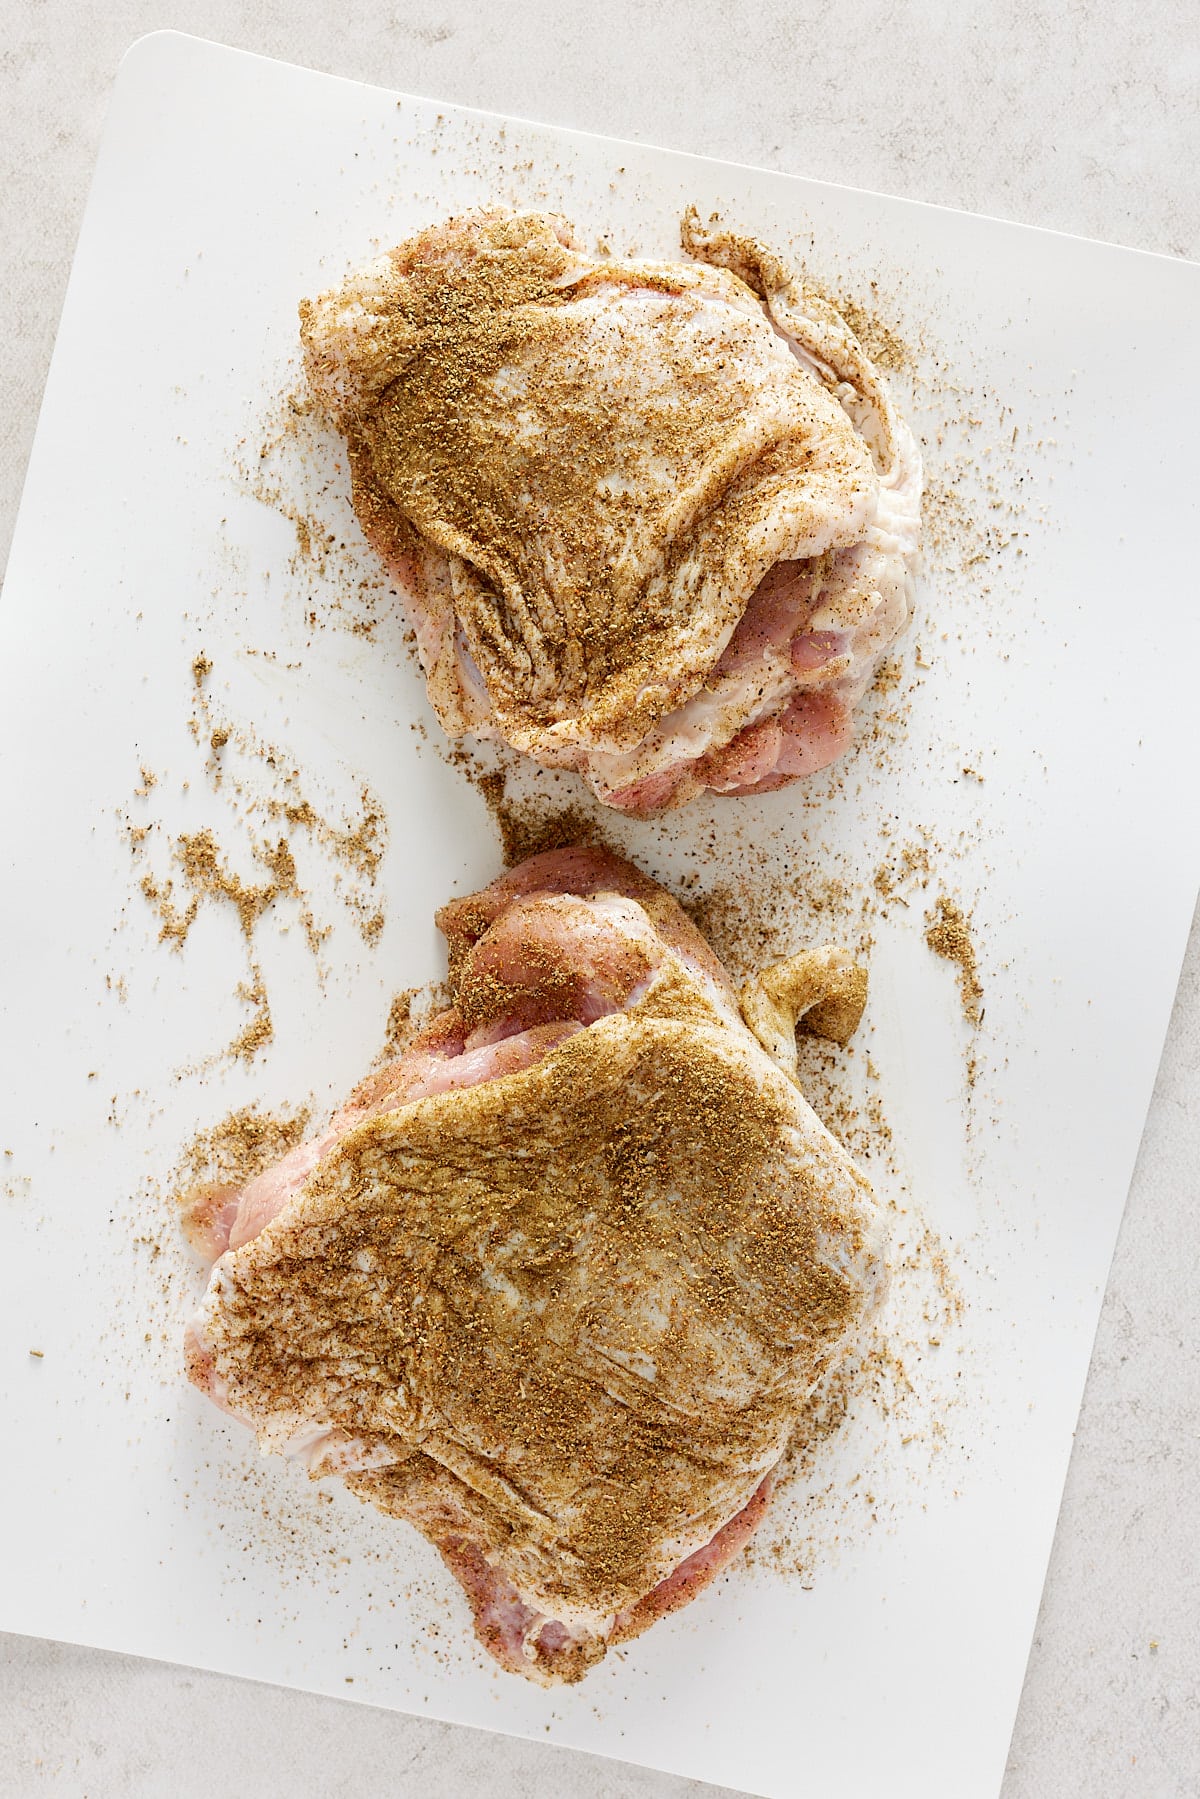 raw turkey thighs rubbed with seasoning blend